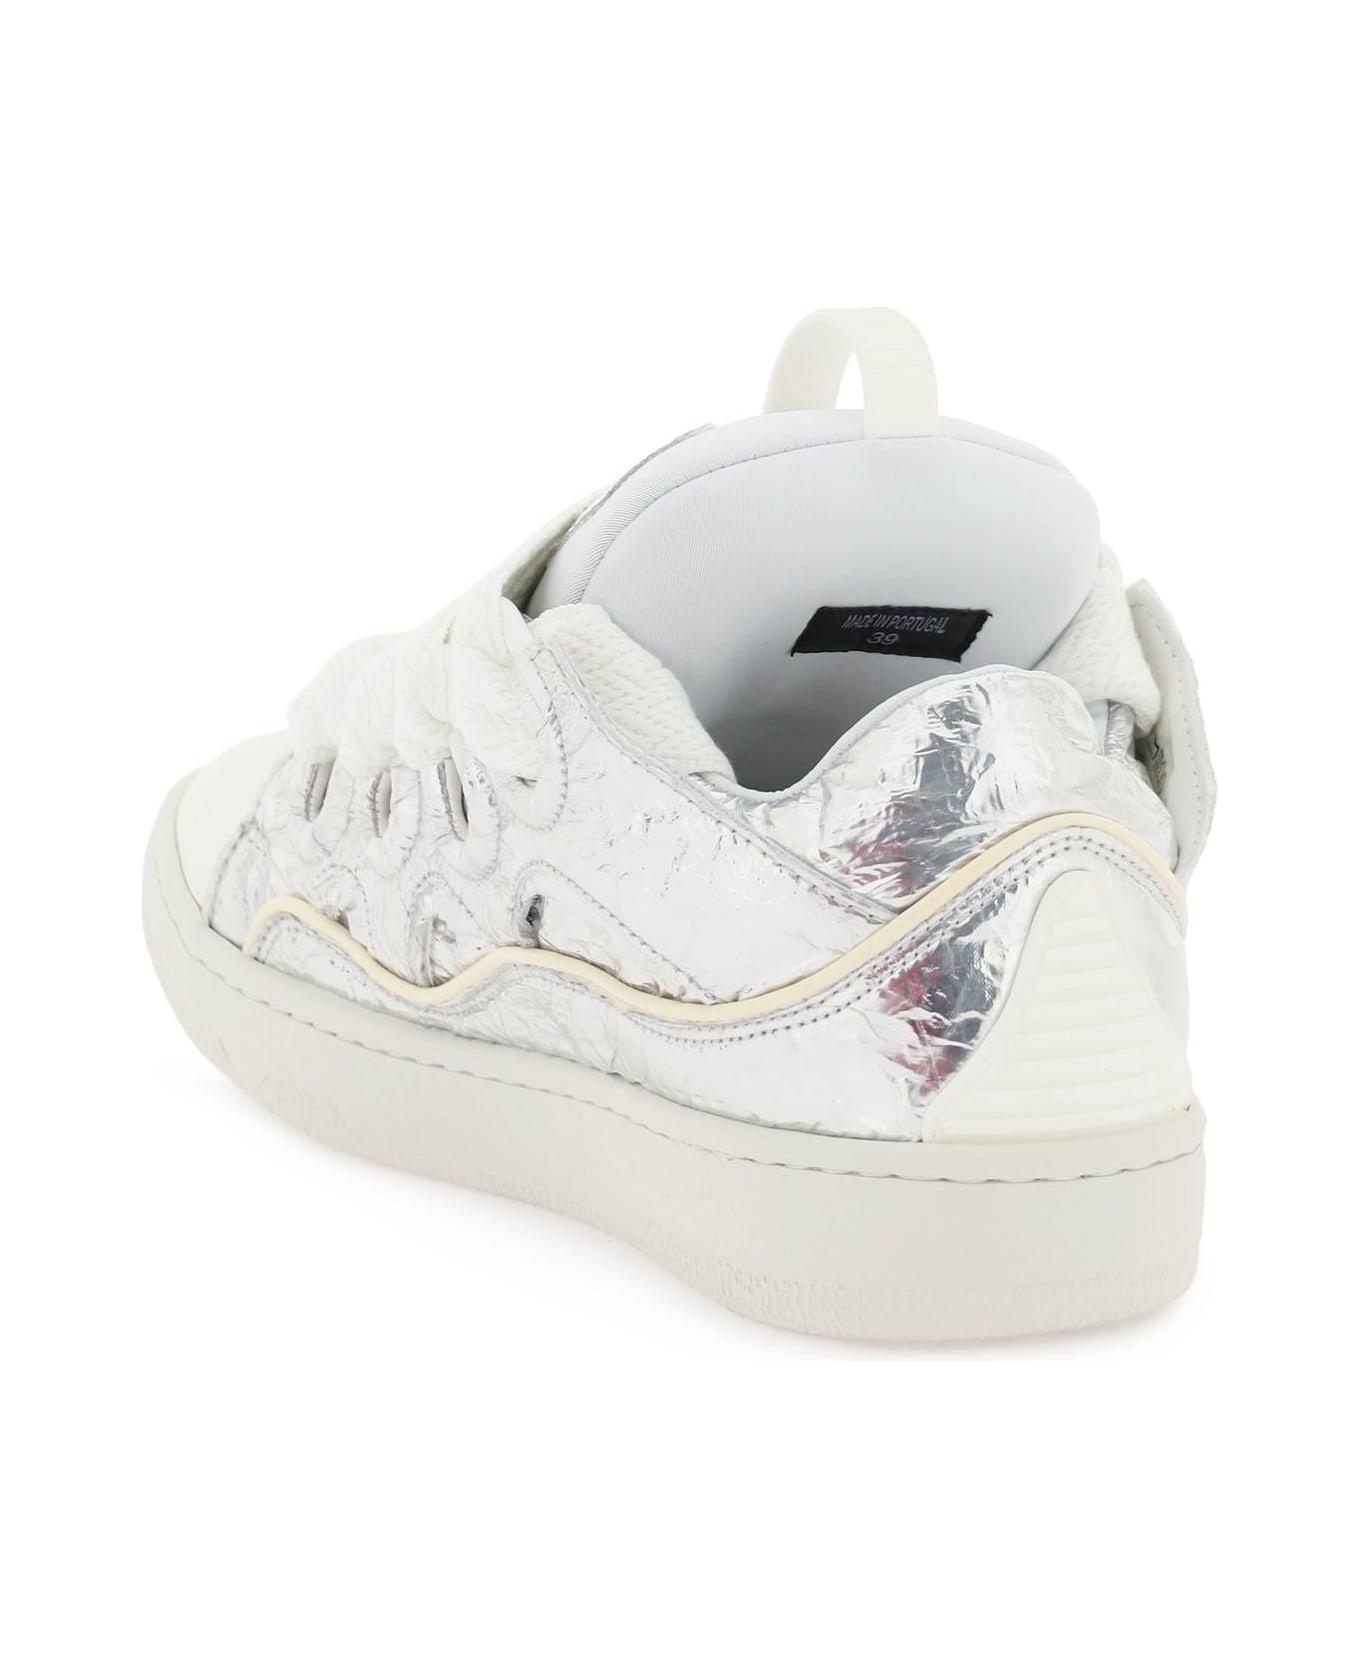 Lanvin Curb Sneakers - Silver